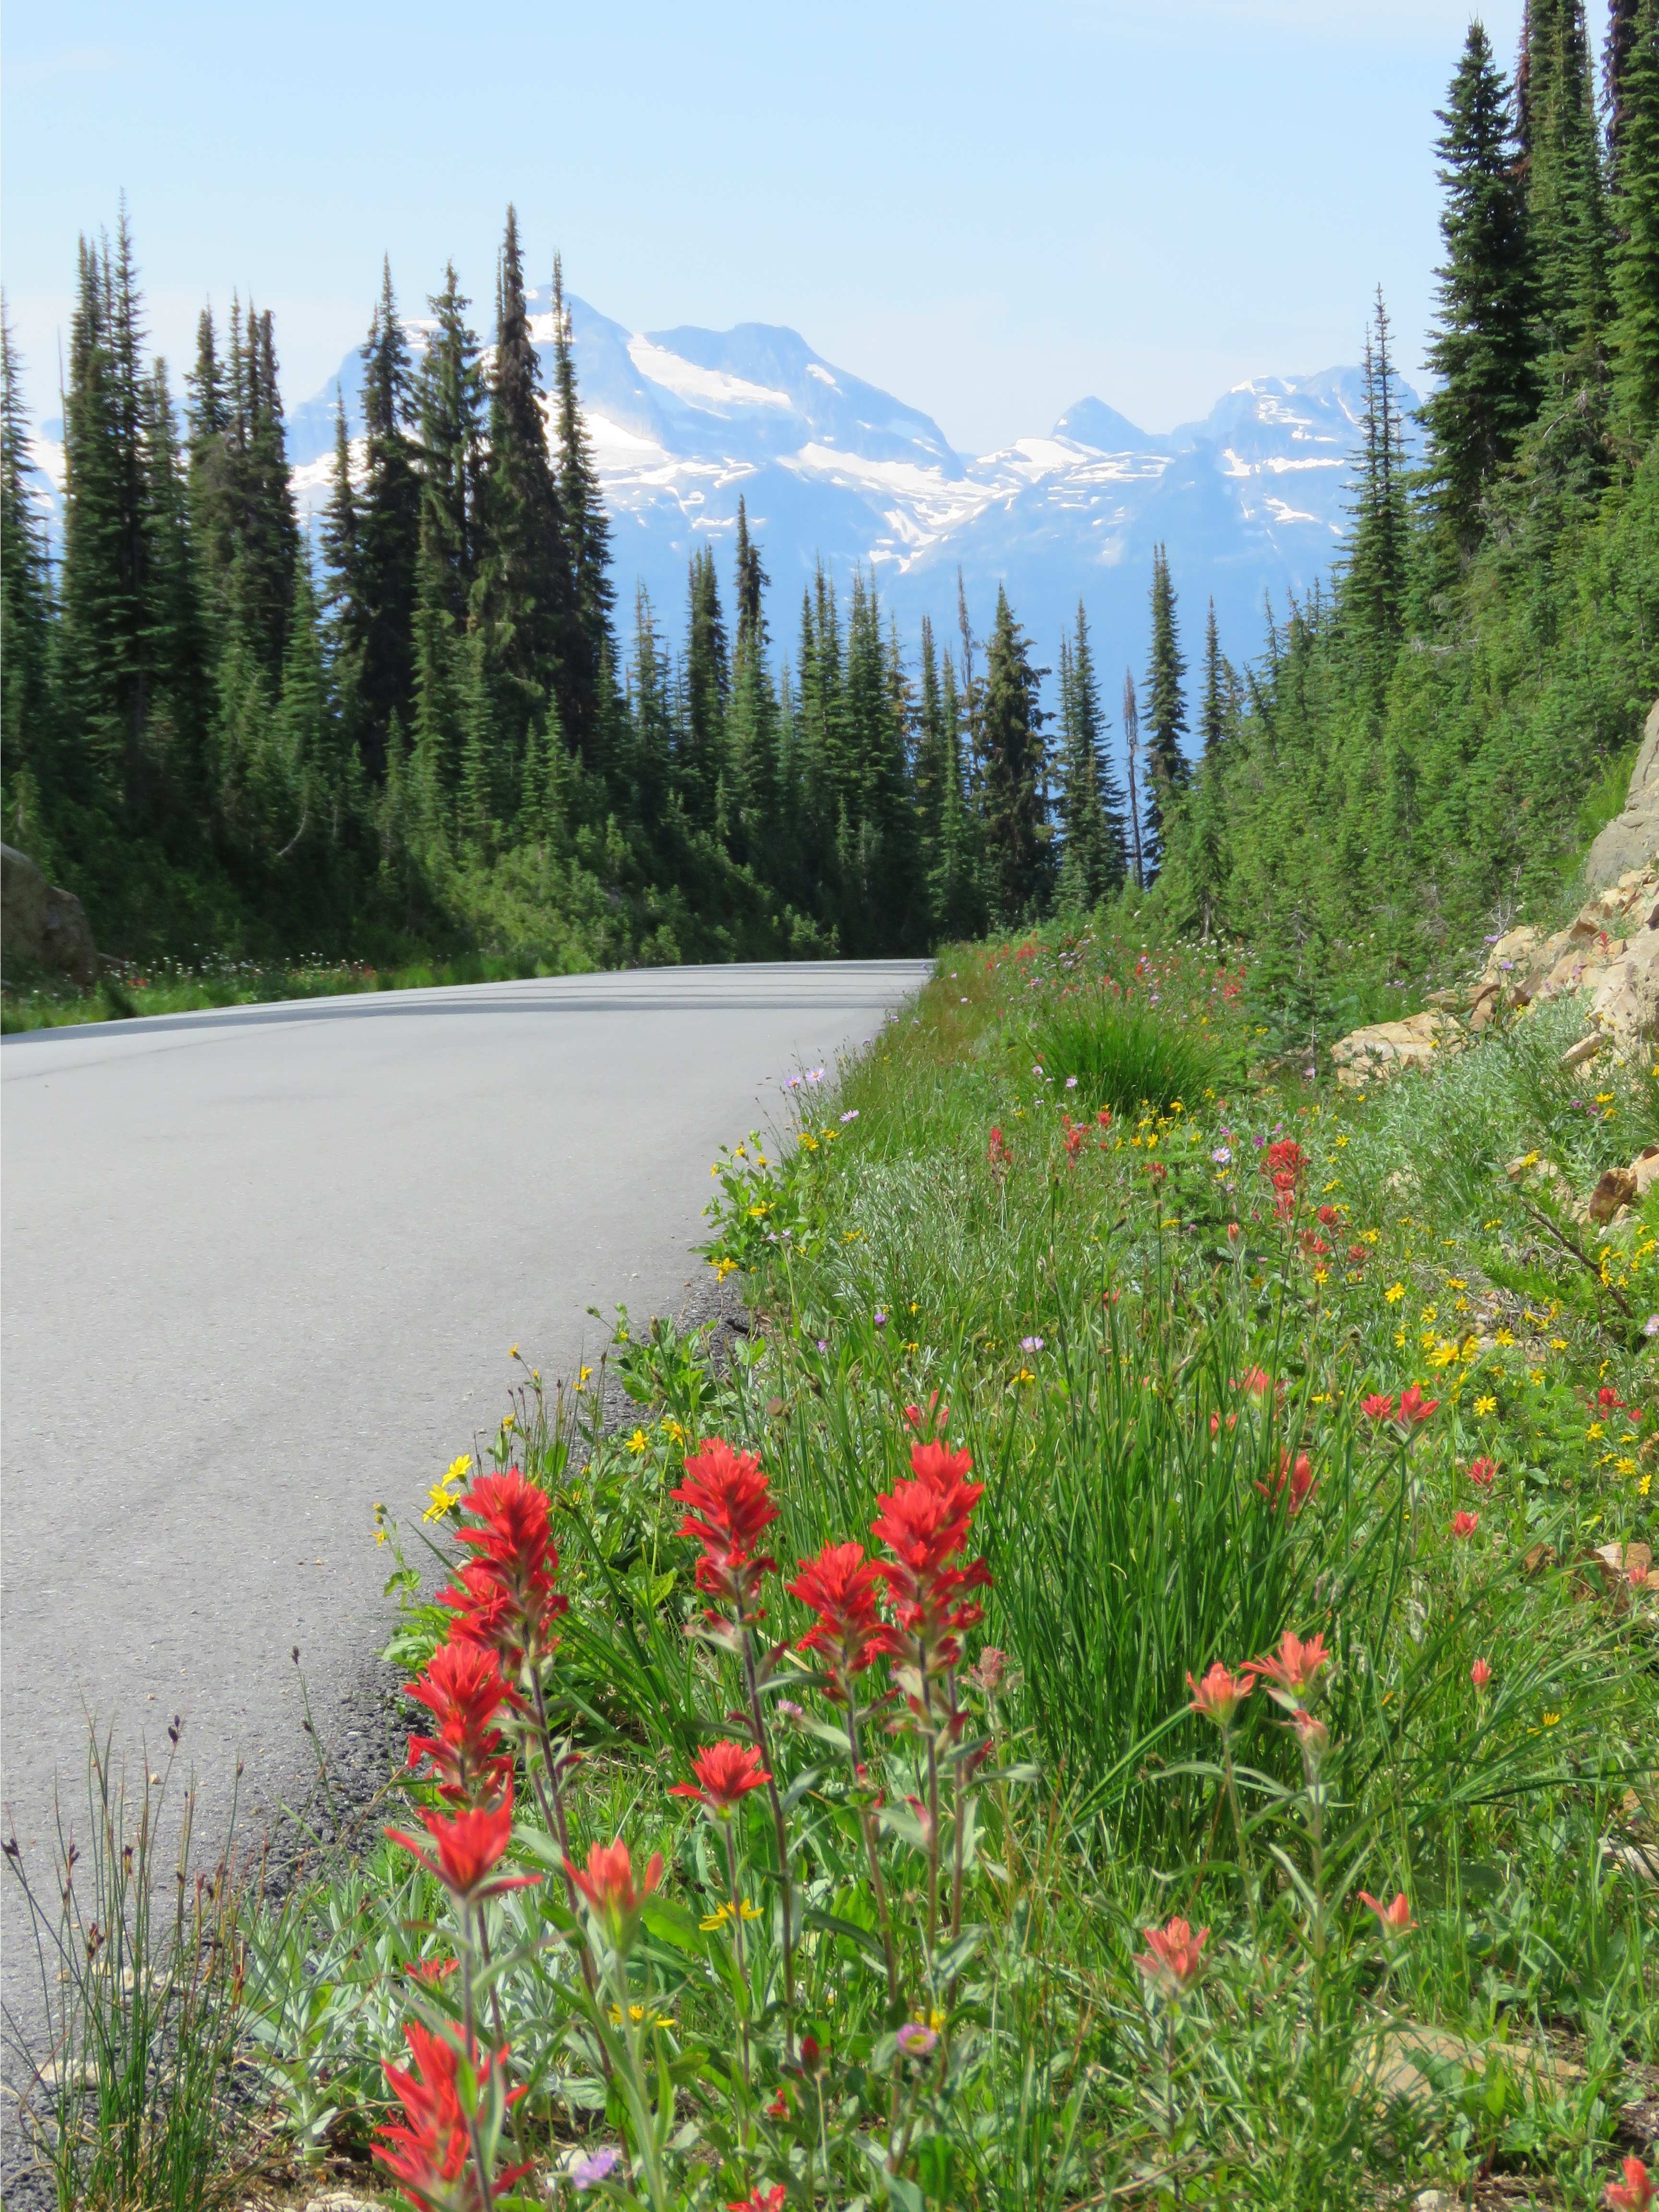 Red flowers growing alongside a road with trees and a mountain in the background.